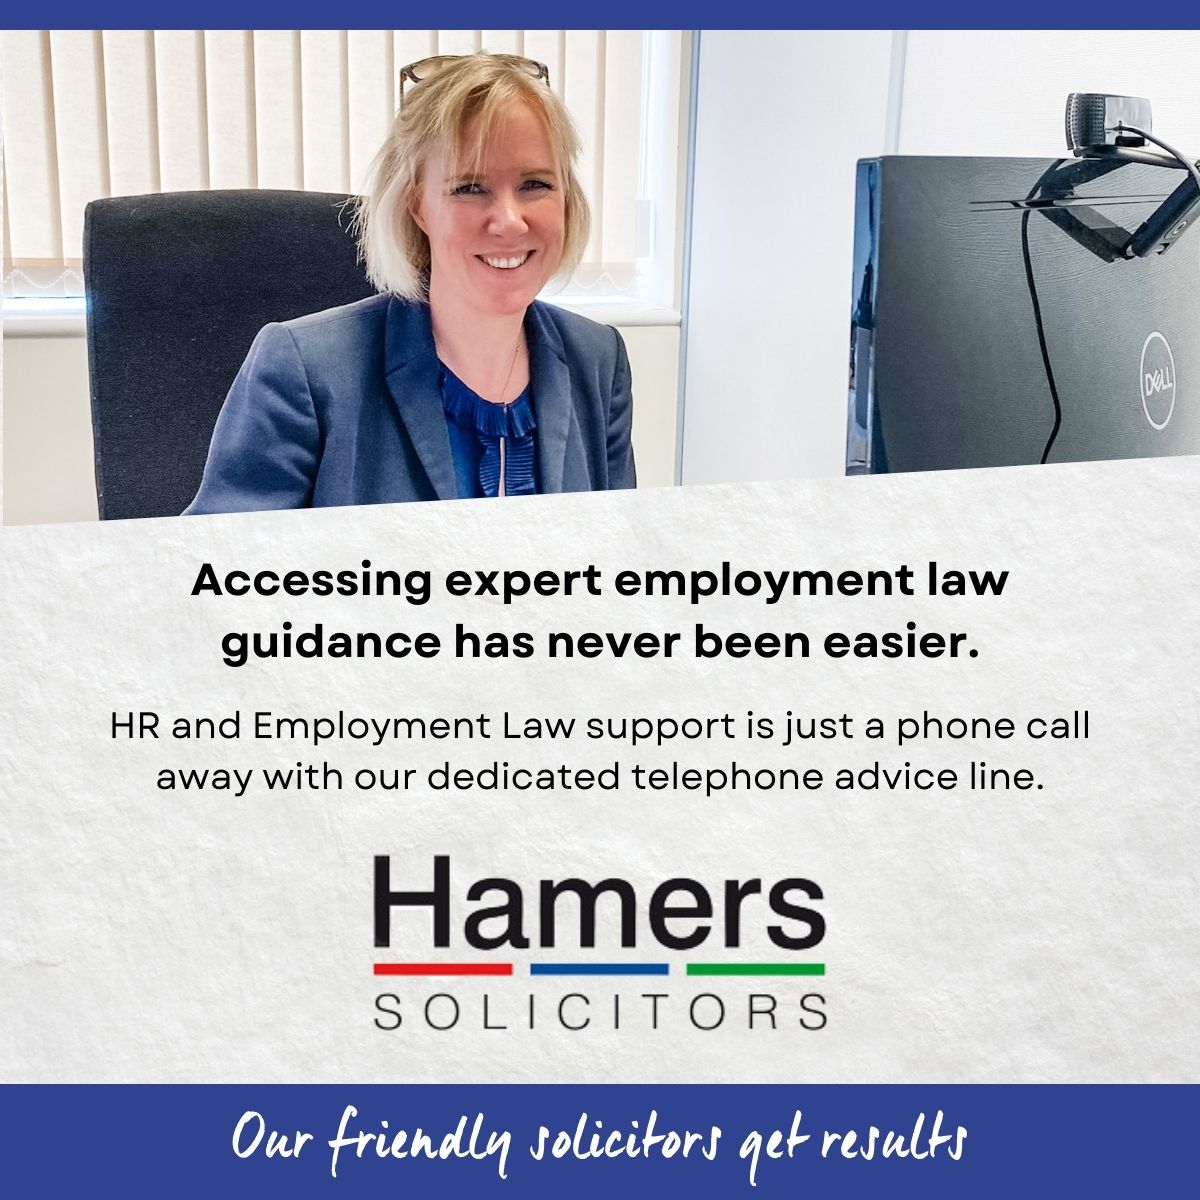 In need of expert employment law advice?

We offer a telephone advice line for those looking for help with HR and #employmentlaw matters.

Our services range from simple annual subscriptions to tailored solutions, ensuring your business has the reassurance it needs.

Get in touch